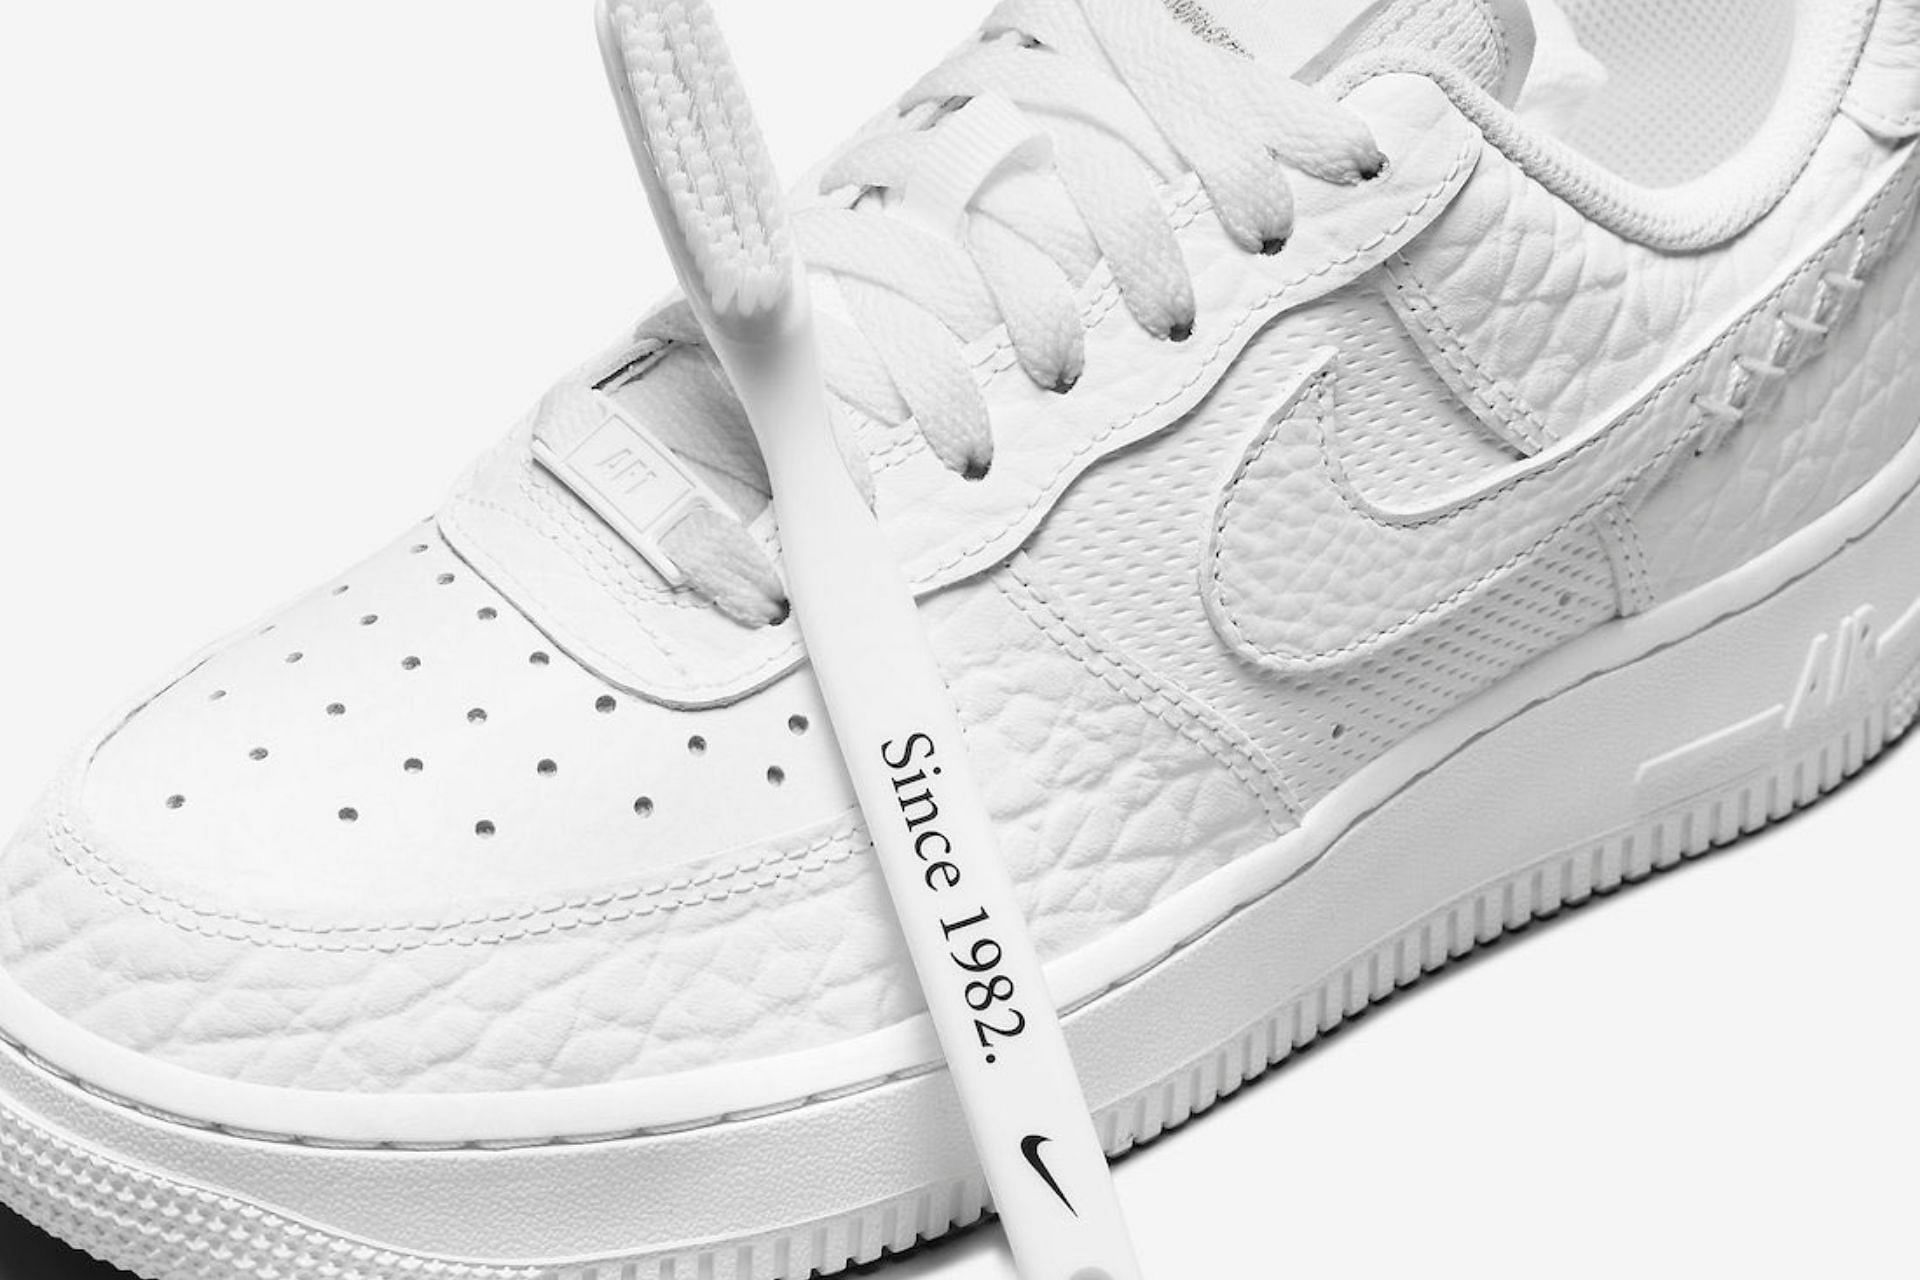 Nike Air Force 1 Low Color of the Month reptile skin shoes (Image via Nike)